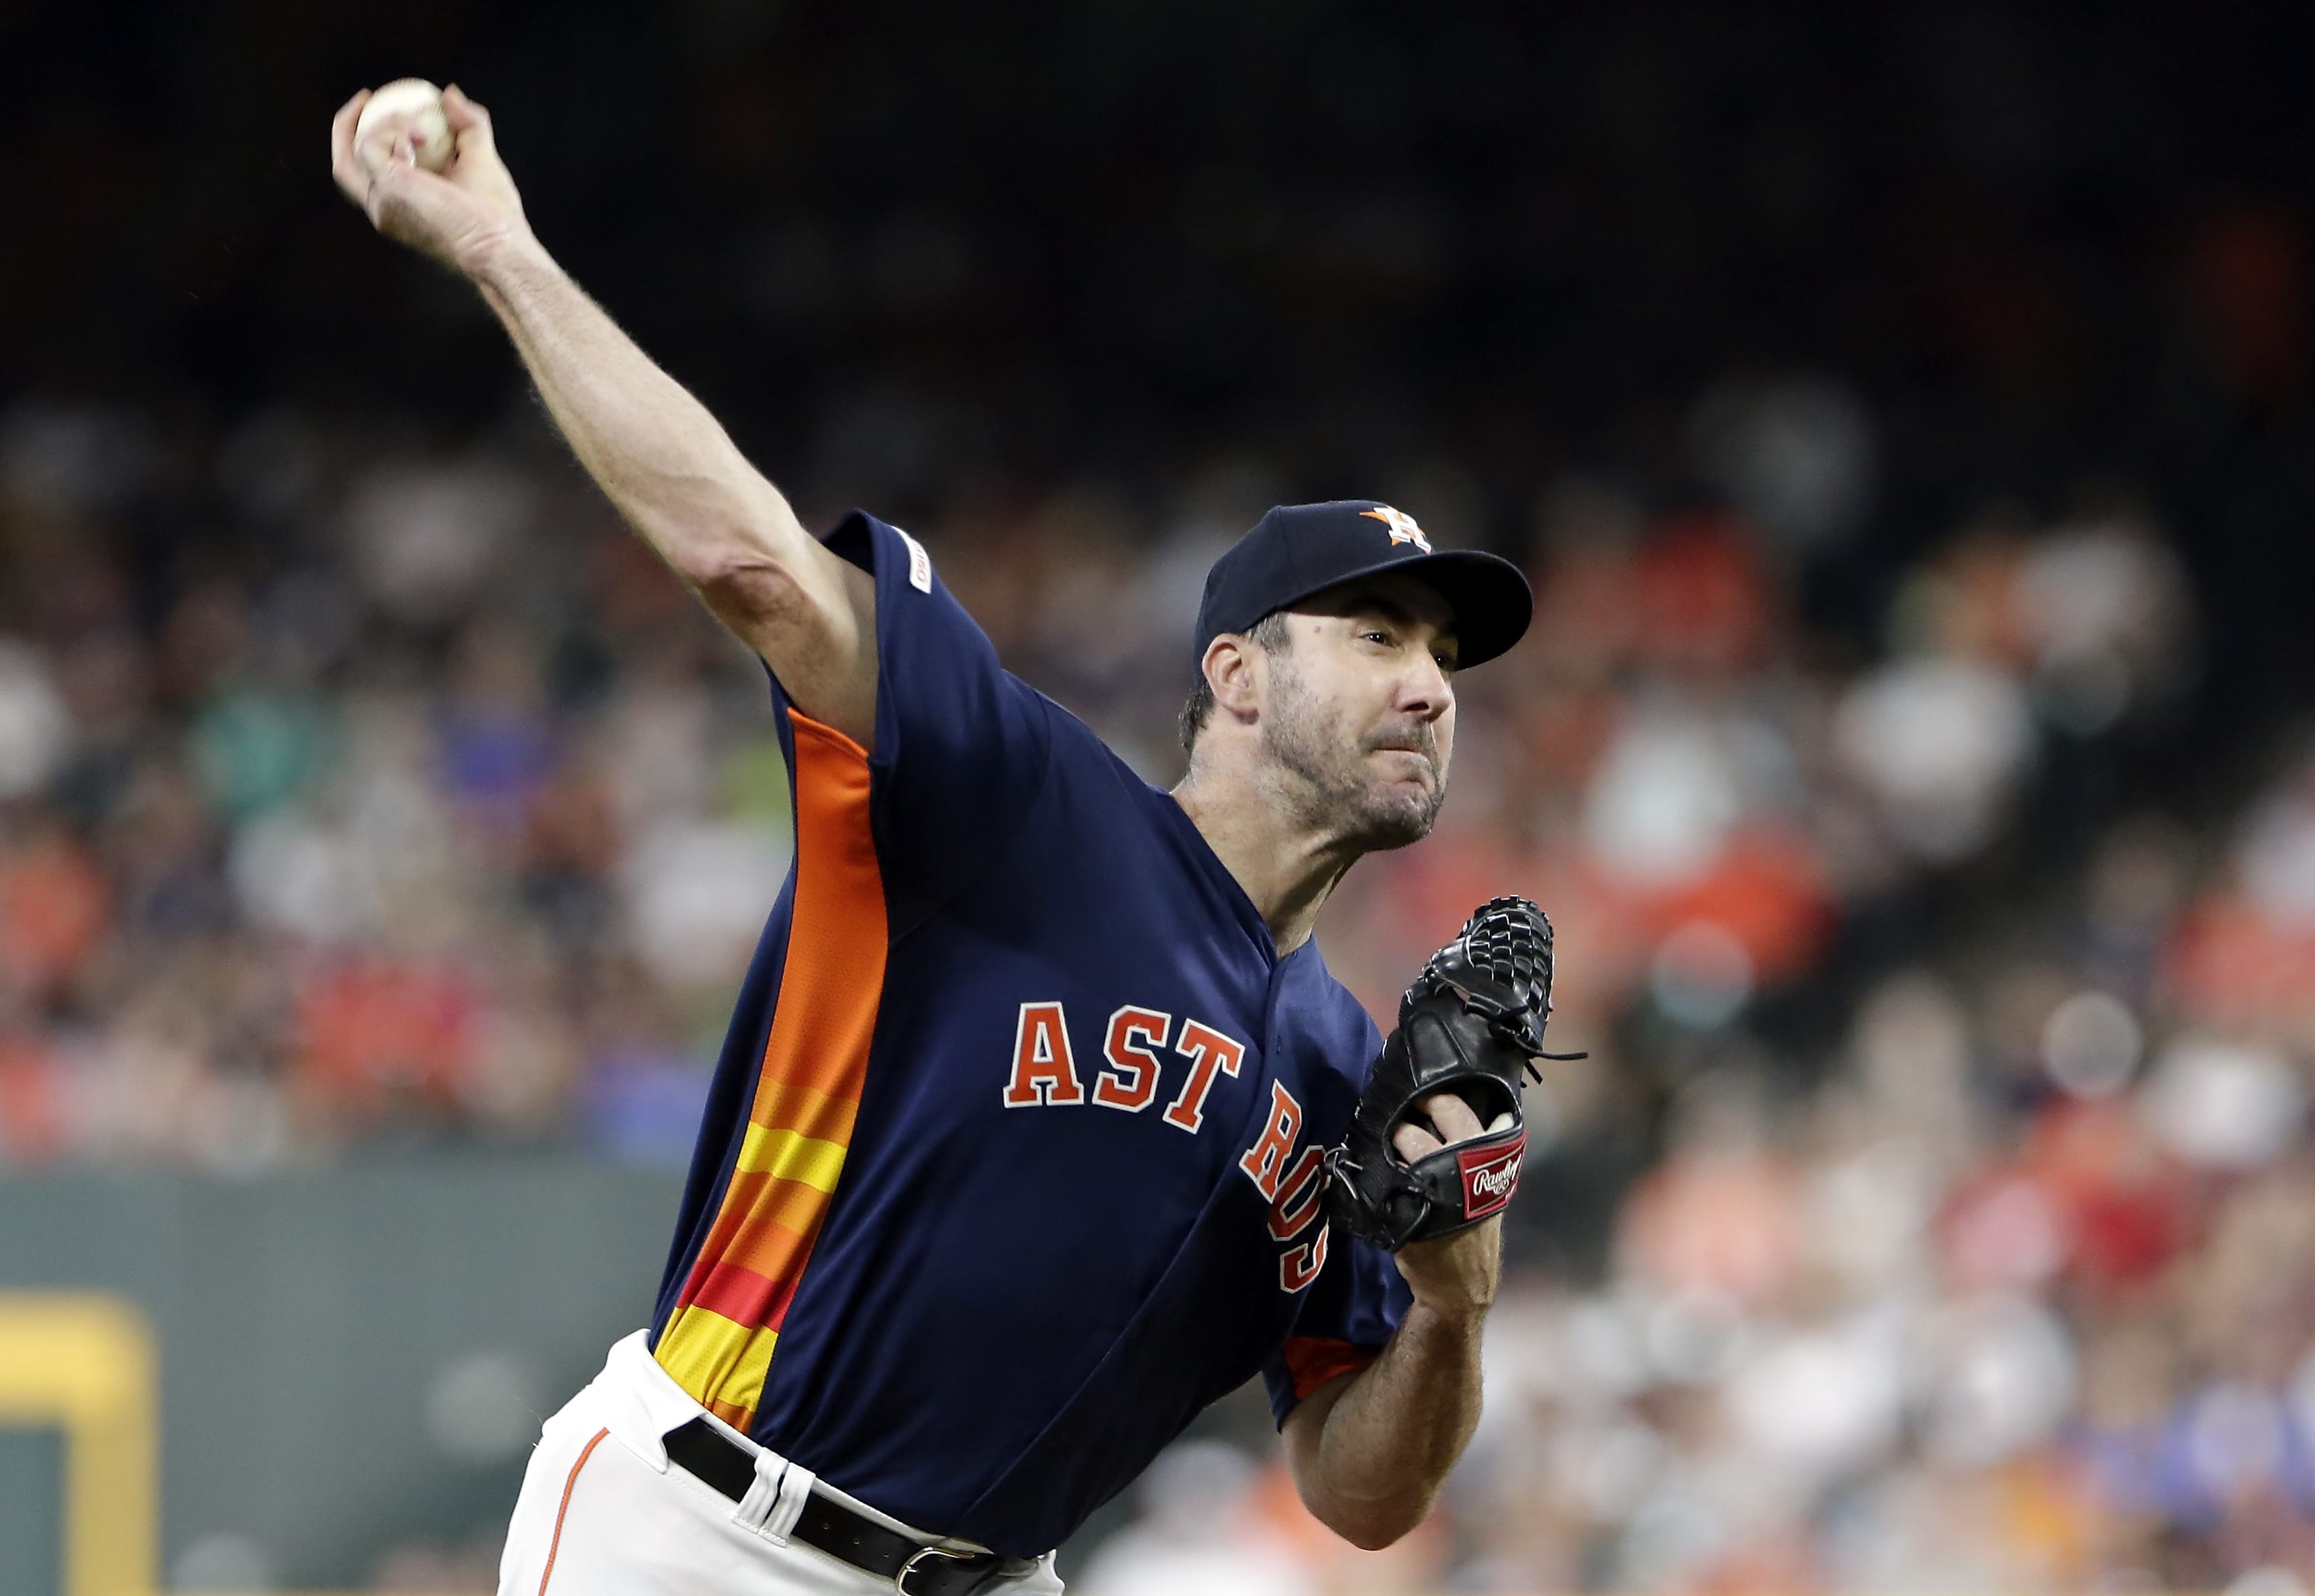 Houston Astros starting pitcher Justin Verlander throws during the first inning of a baseball game against the Seattle Mariners, Sunday, Aug. 4, 2019, in Houston.